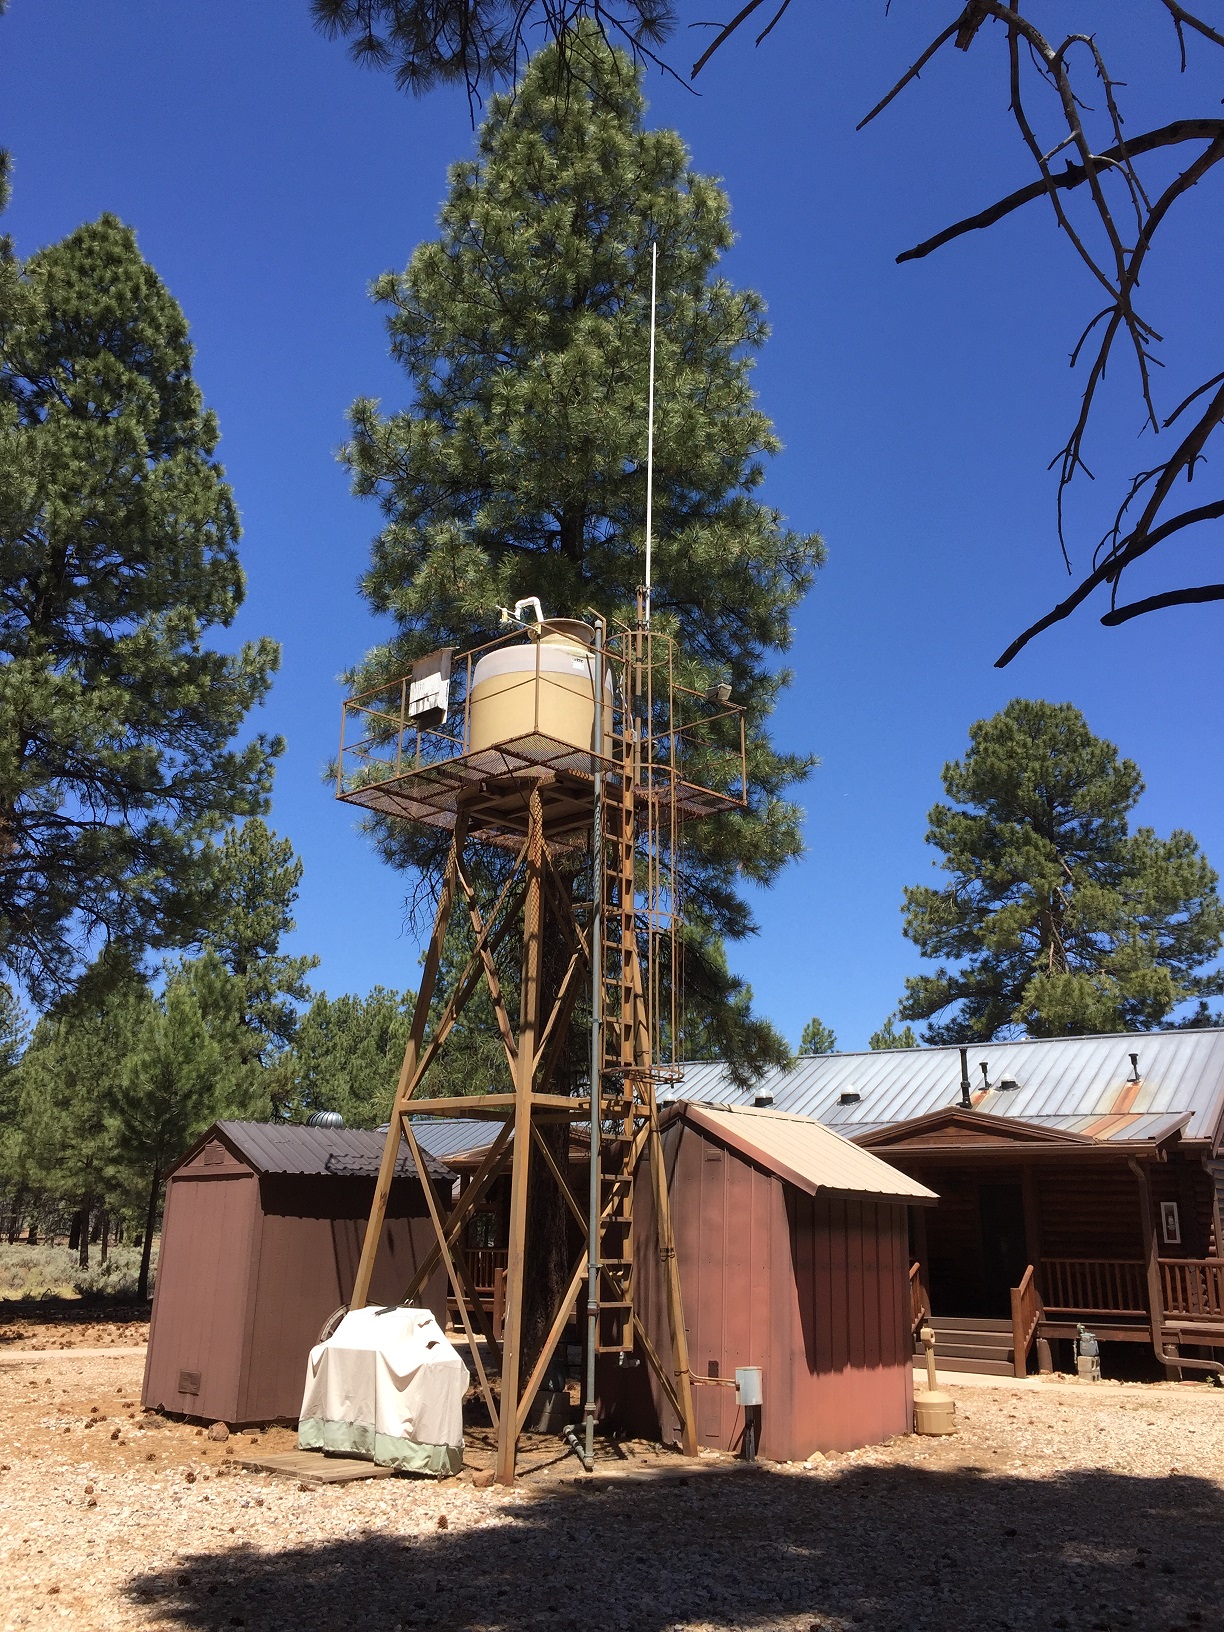 Water tower and storage sheds at the NPS Oak Grove Administrative Site